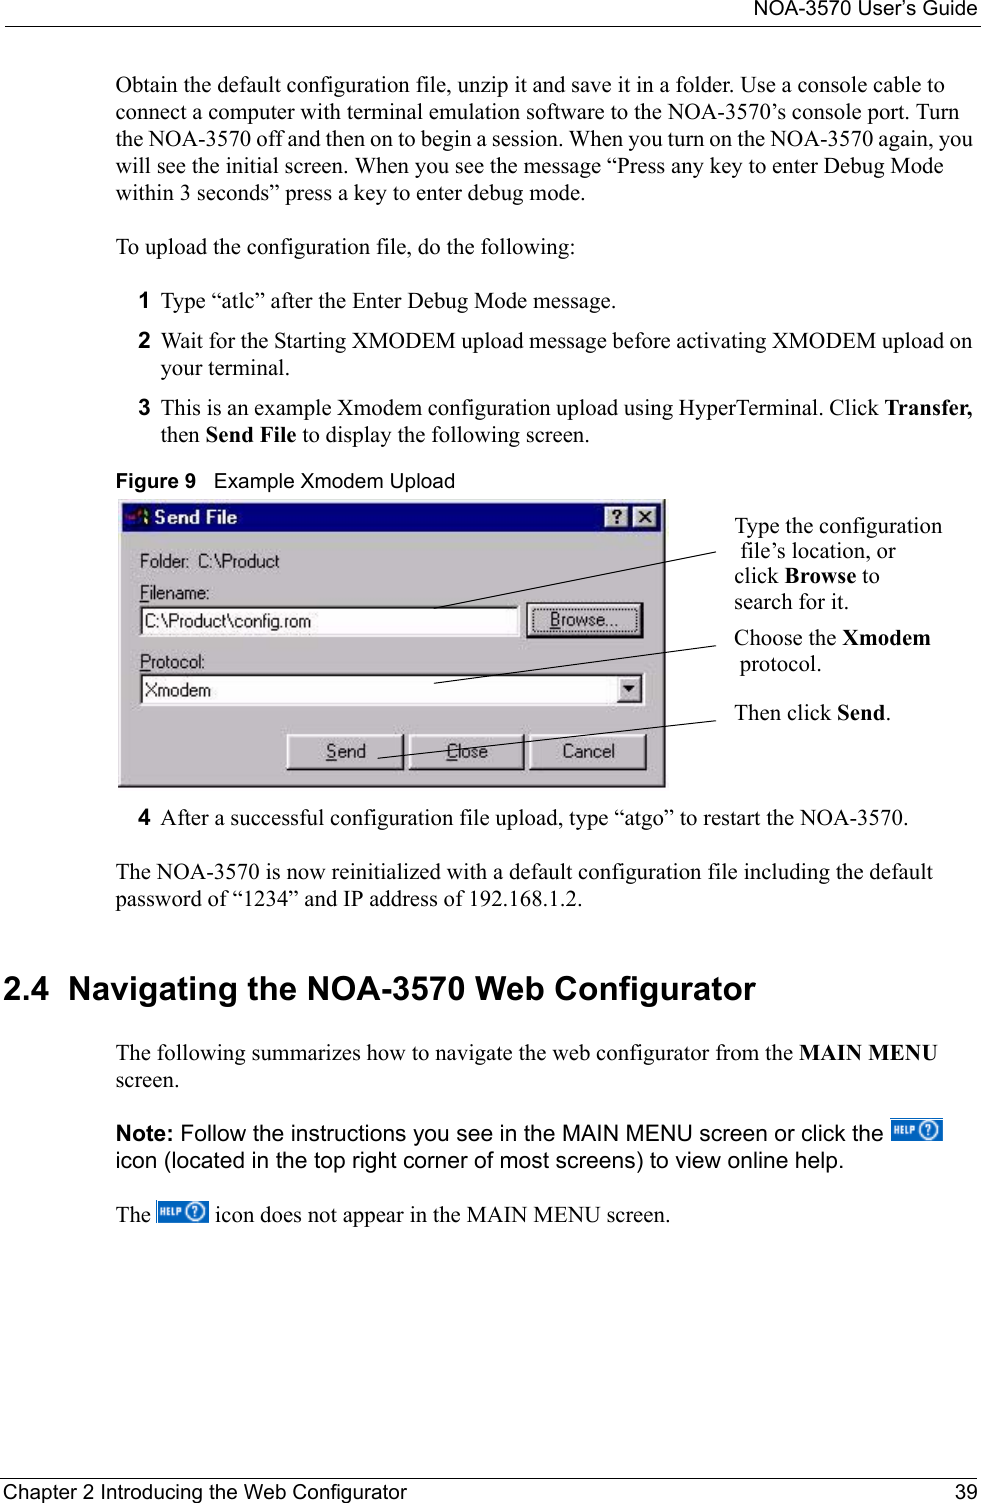 NOA-3570 User’s GuideChapter 2 Introducing the Web Configurator 39Obtain the default configuration file, unzip it and save it in a folder. Use a console cable to connect a computer with terminal emulation software to the NOA-3570’s console port. Turn the NOA-3570 off and then on to begin a session. When you turn on the NOA-3570 again, you will see the initial screen. When you see the message “Press any key to enter Debug Mode within 3 seconds” press a key to enter debug mode.To upload the configuration file, do the following:1Type “atlc” after the Enter Debug Mode message.2Wait for the Starting XMODEM upload message before activating XMODEM upload on your terminal.3This is an example Xmodem configuration upload using HyperTerminal. Click Transfer, then Send File to display the following screen.Figure 9   Example Xmodem Upload4After a successful configuration file upload, type “atgo” to restart the NOA-3570.The NOA-3570 is now reinitialized with a default configuration file including the default password of “1234” and IP address of 192.168.1.2.2.4  Navigating the NOA-3570 Web ConfiguratorThe following summarizes how to navigate the web configurator from the MAIN MENU screen.Note: Follow the instructions you see in the MAIN MENU screen or click the   icon (located in the top right corner of most screens) to view online help.The   icon does not appear in the MAIN MENU screen.Type the configuration file’s location, or click Browse to search for it.Choose the Xmodem protocol.Then click Send.